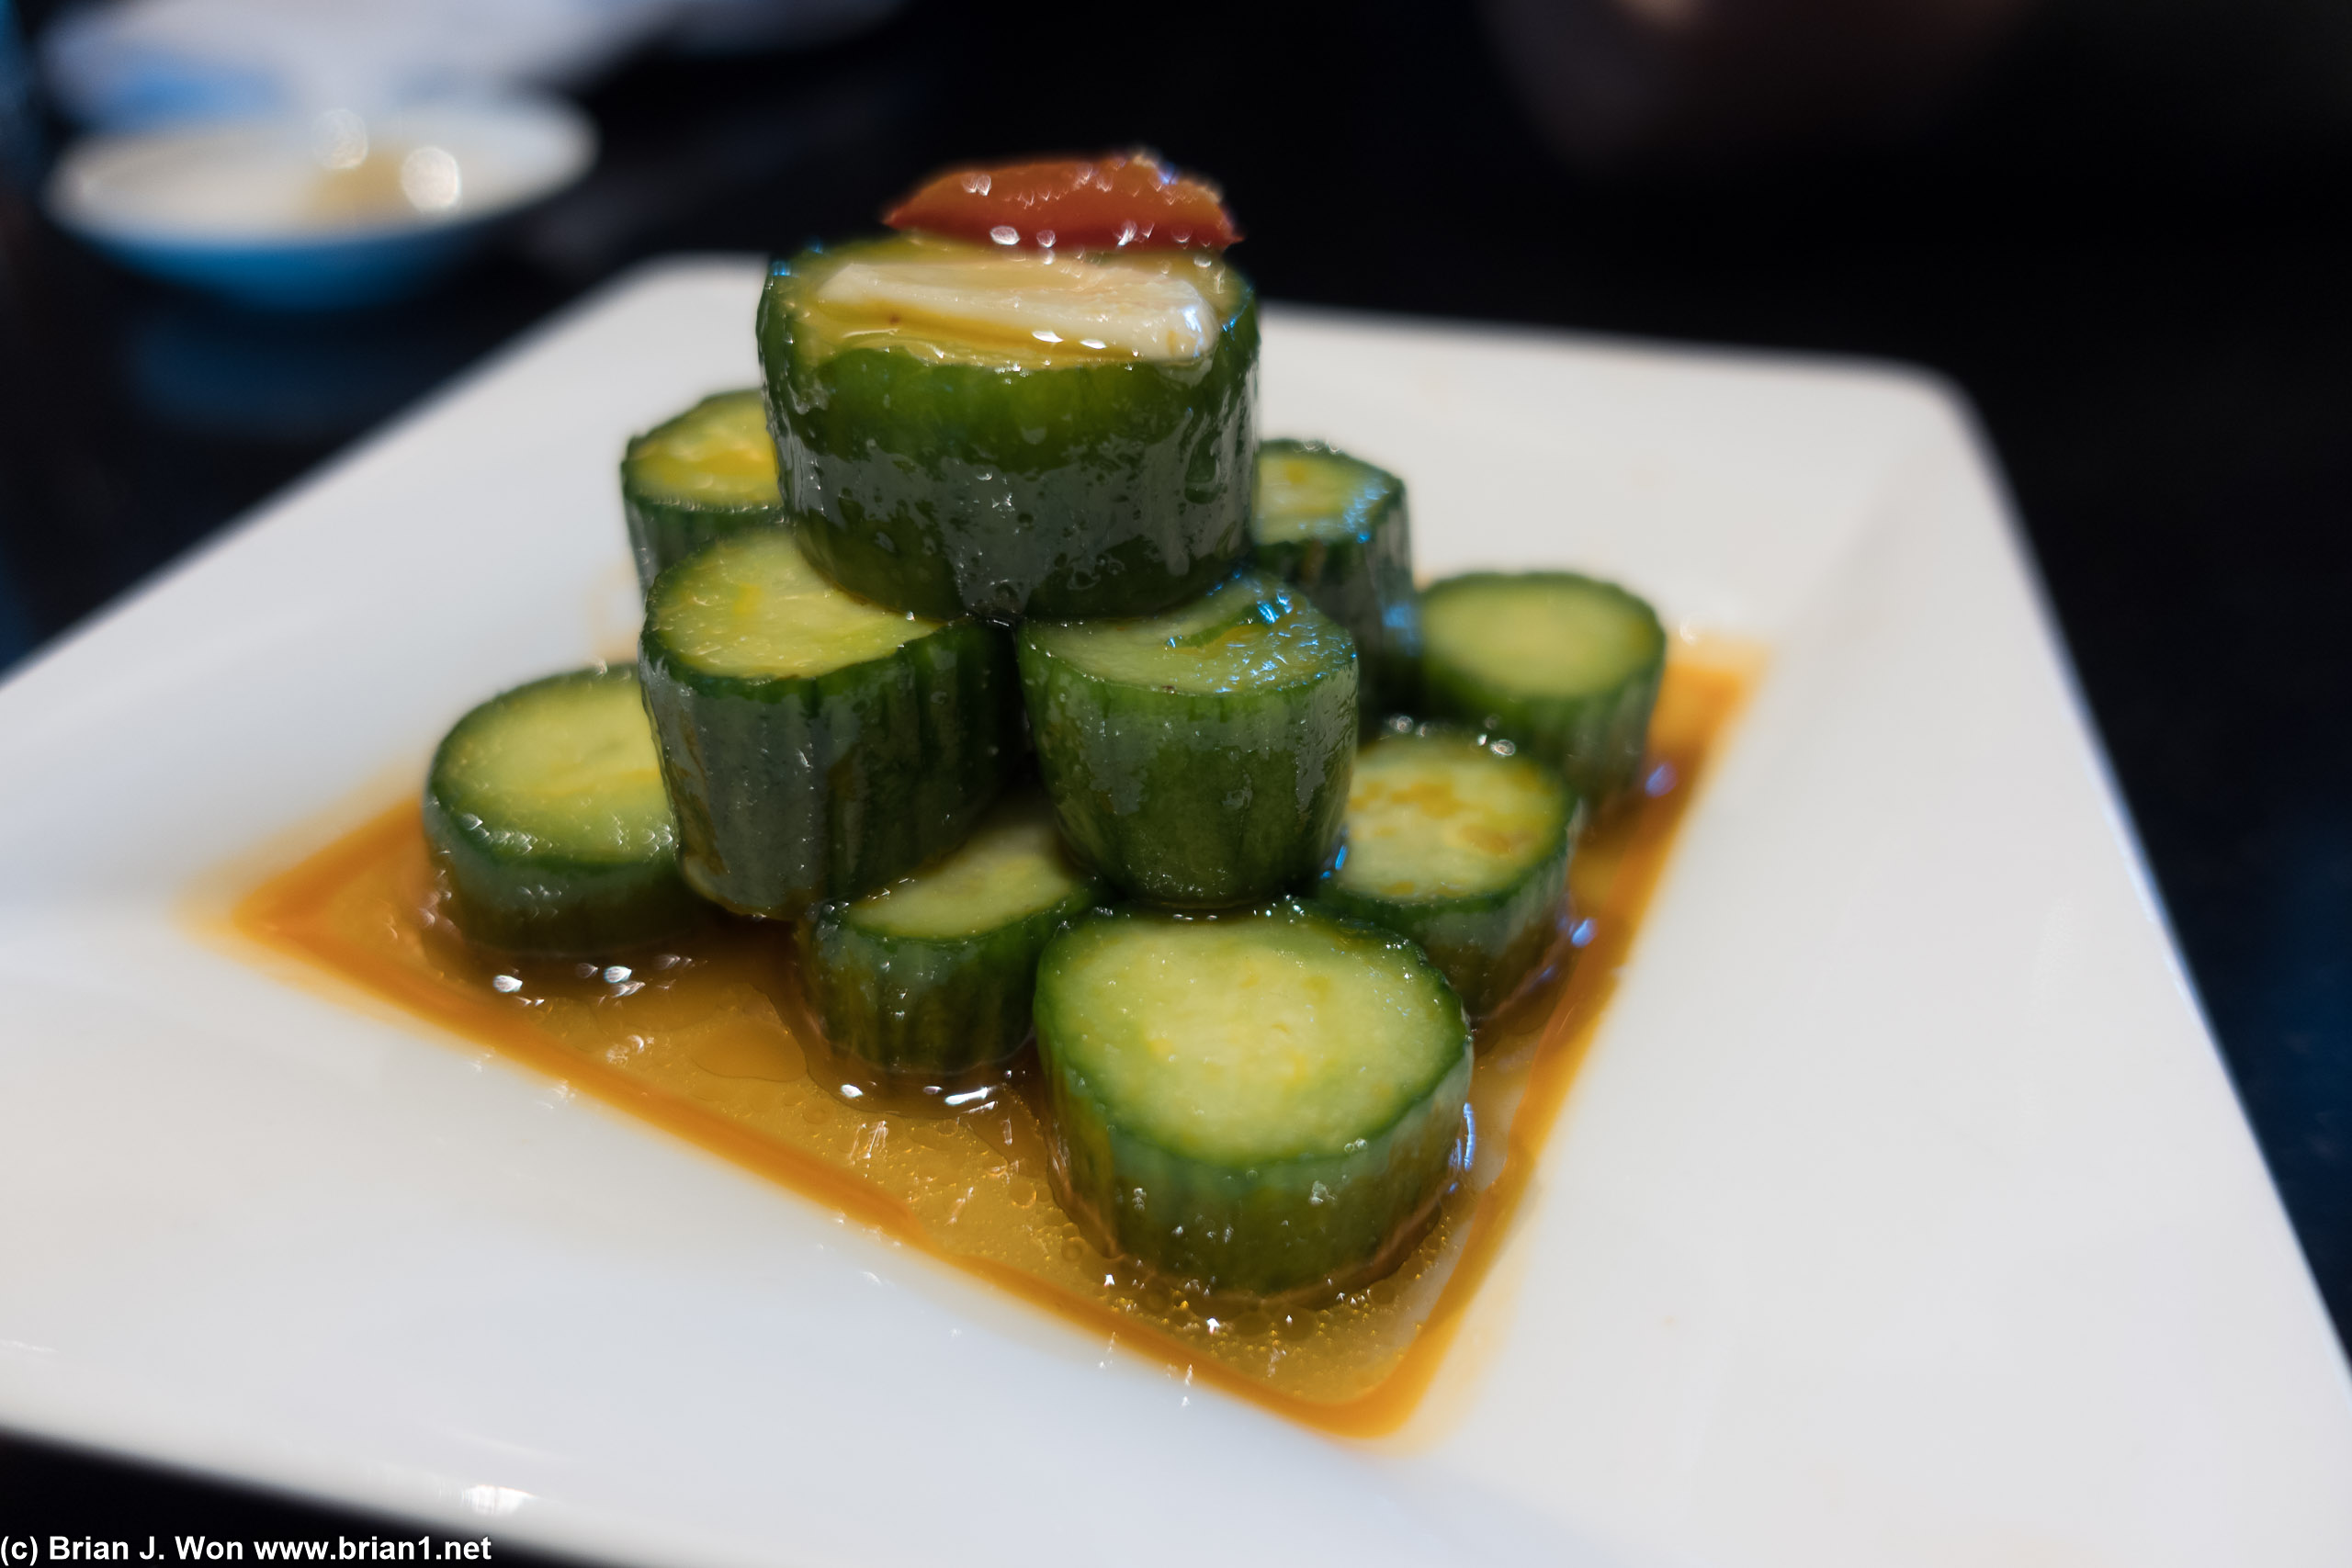 Nothing beats Din Tai Fung's spicy cold cucumber.